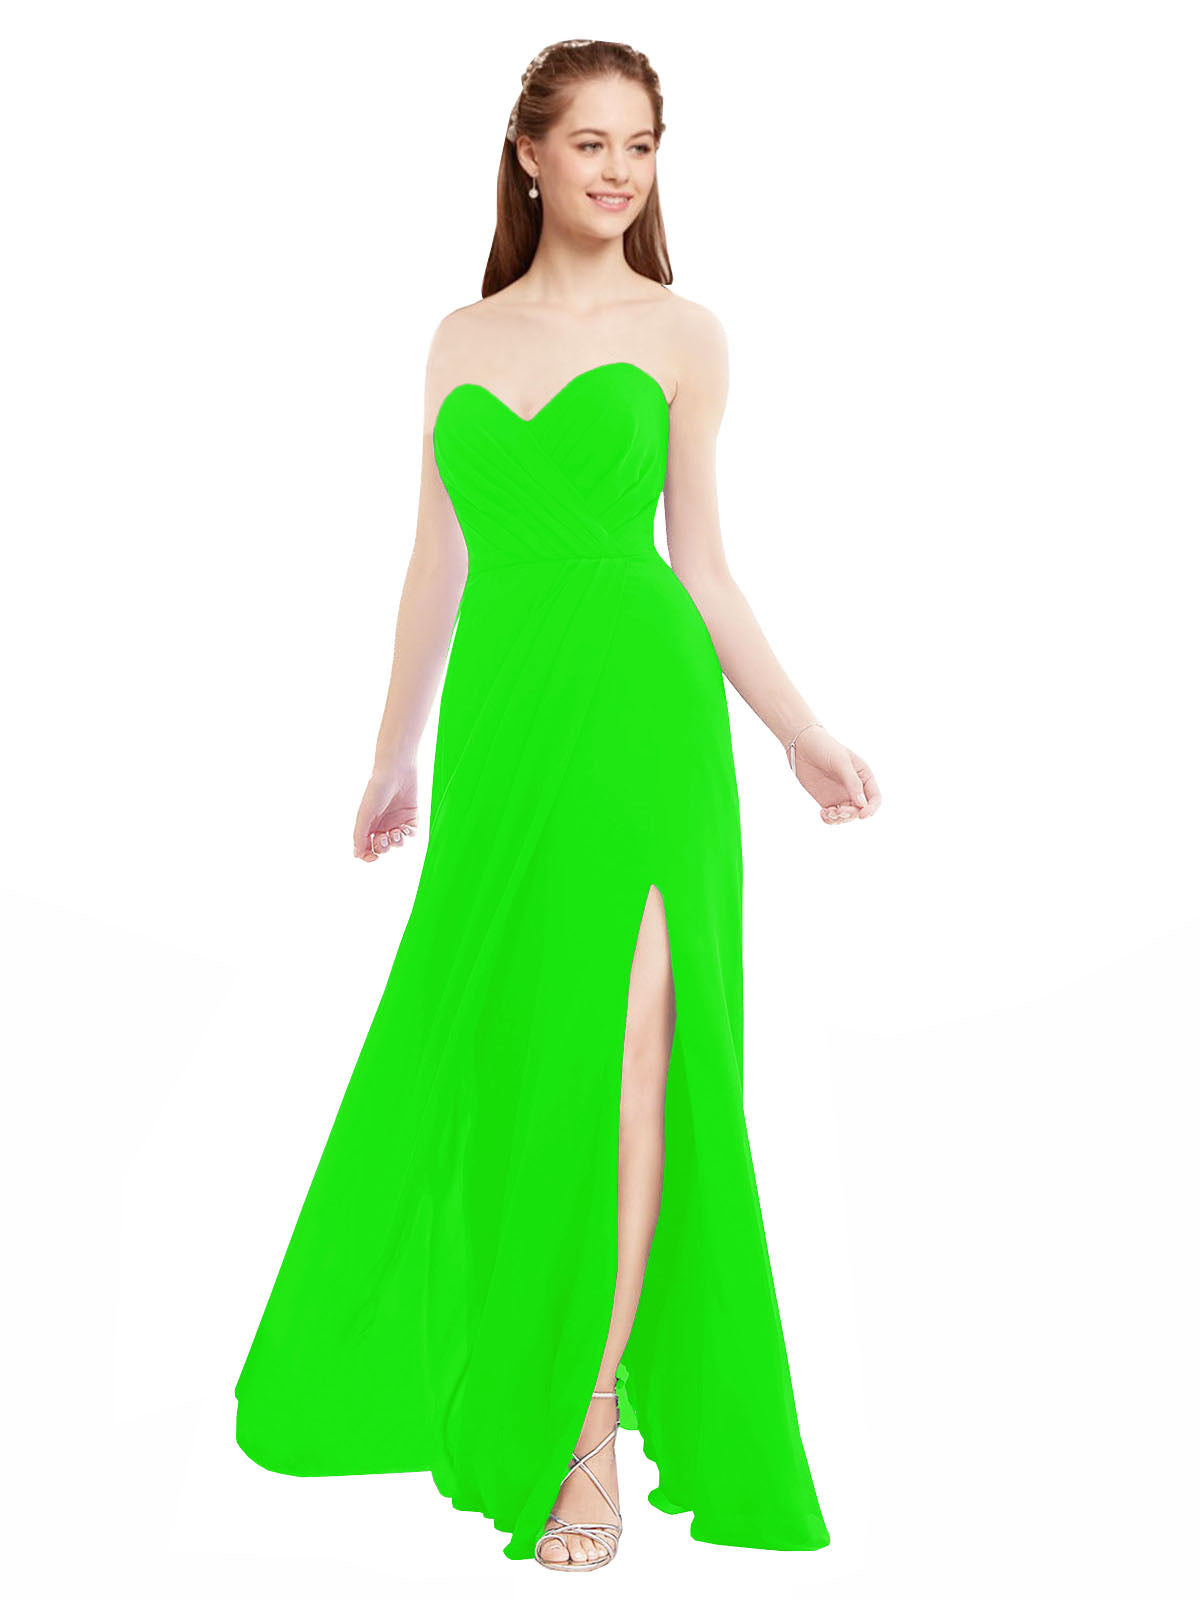 Lime Green A-Line Sweetheart Strapless Sleeveless Long Bridesmaid Dress Meadow